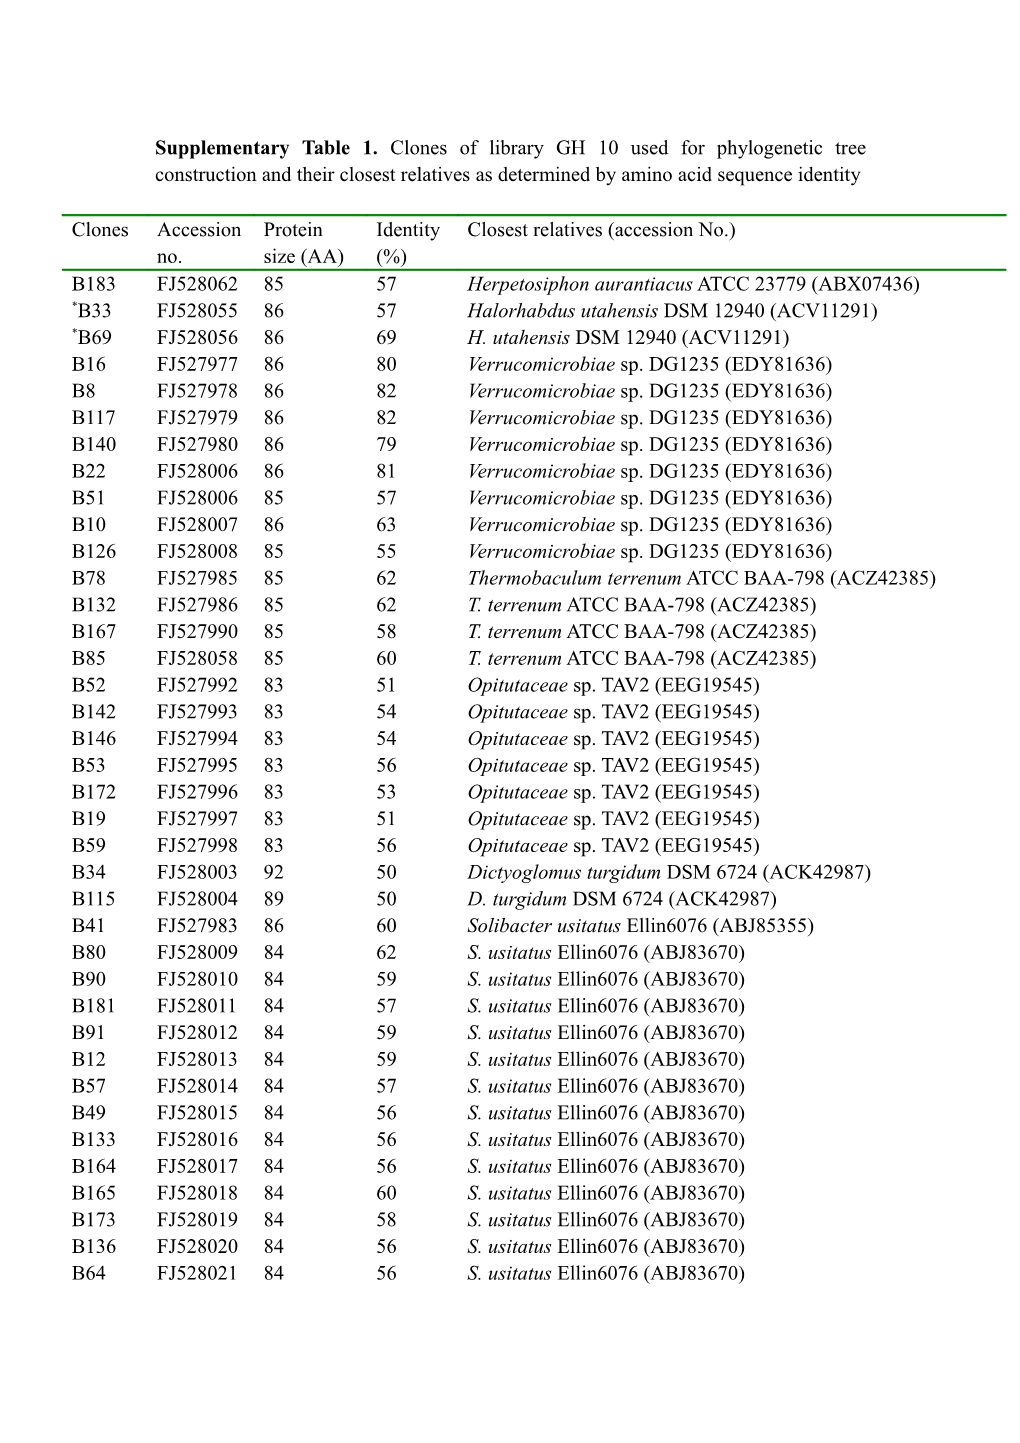 Table 1 Gene Fragments, Accession Number, the Accessing Number, Protein Length, the % Of